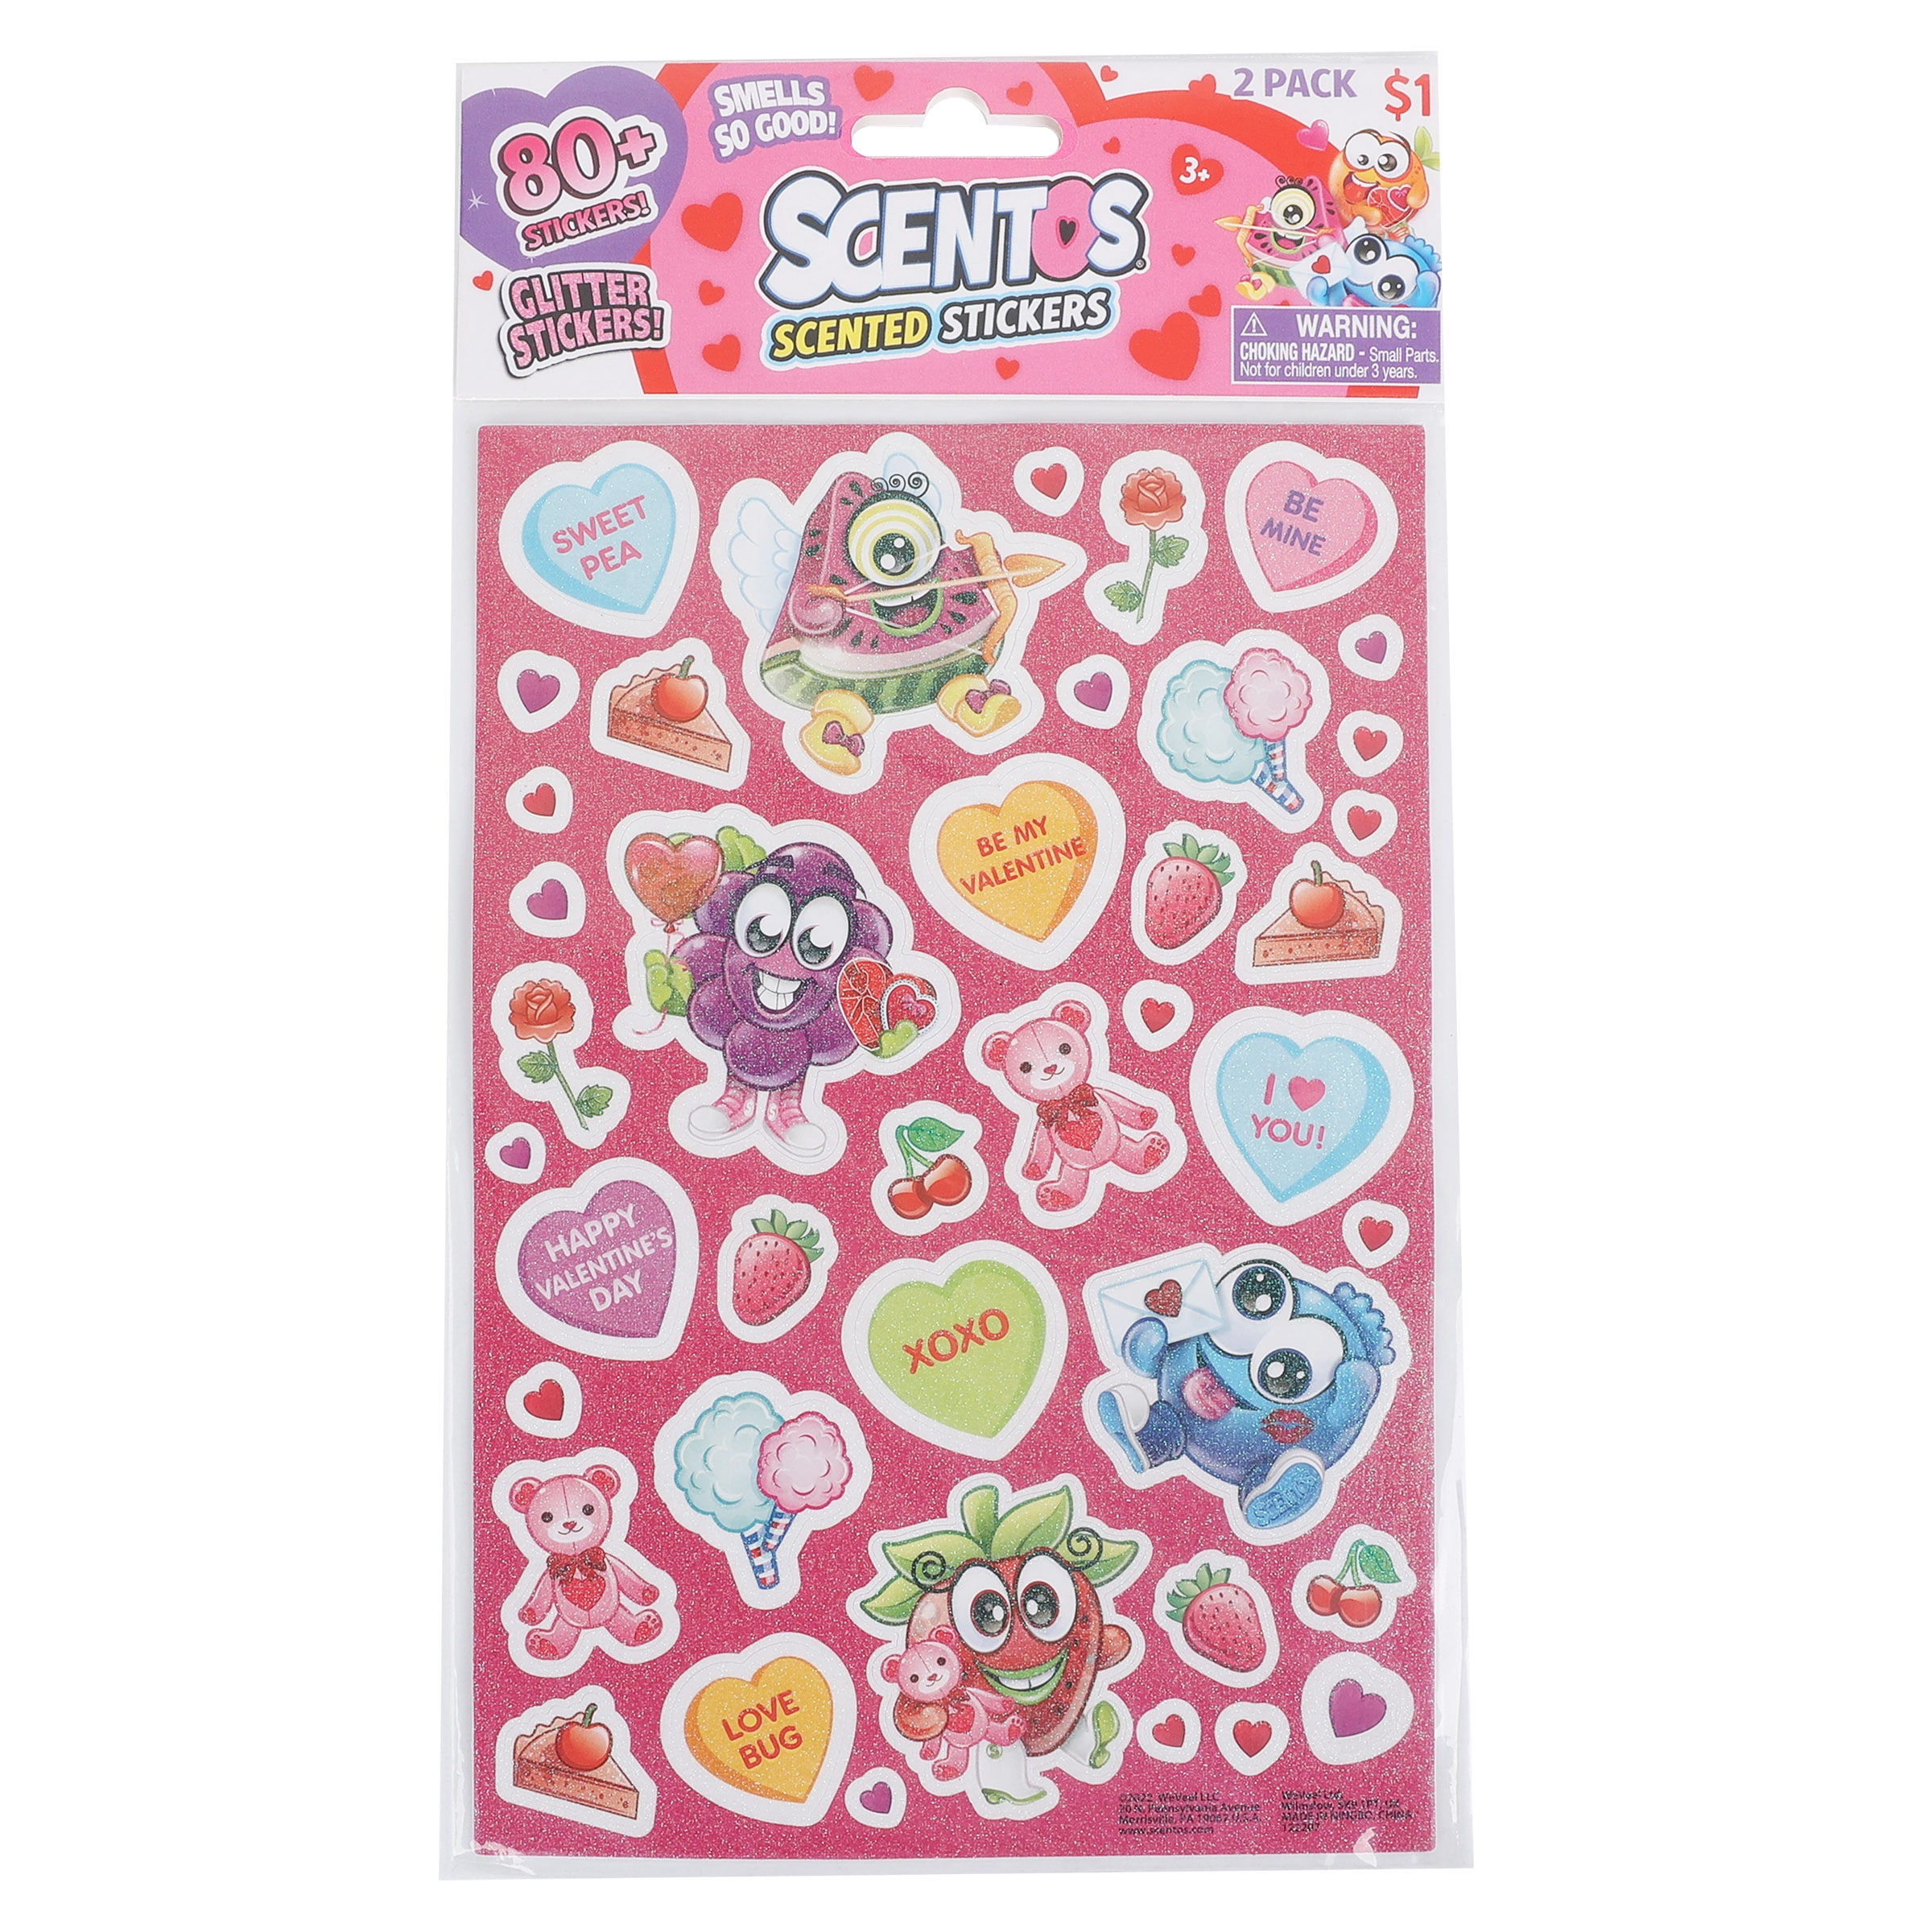 Scentos Valentine's Day 80+ Scented Glitter Stickers Pink - Ages 3+, Stationery